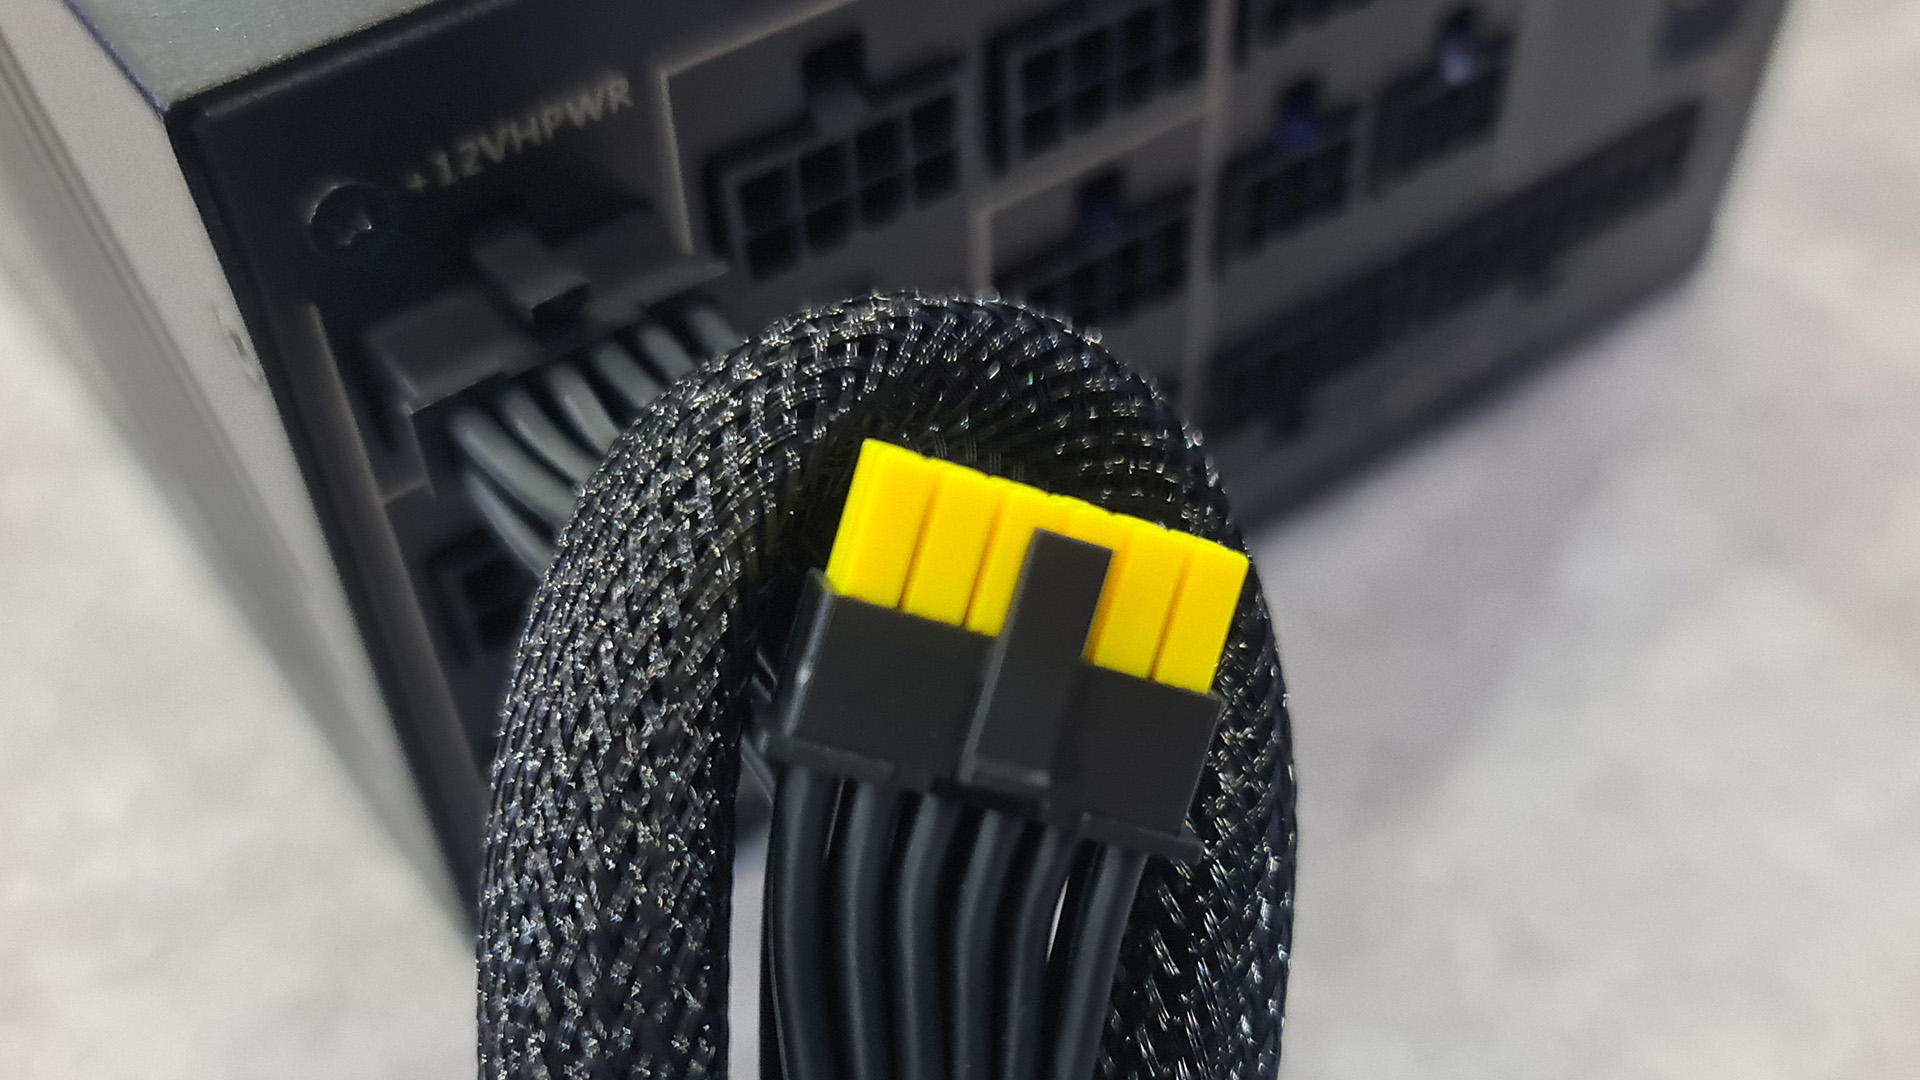  MSI has tweaked the notorious 12-pin GPU power cable so it's more obvious when it's not properly plugged in 